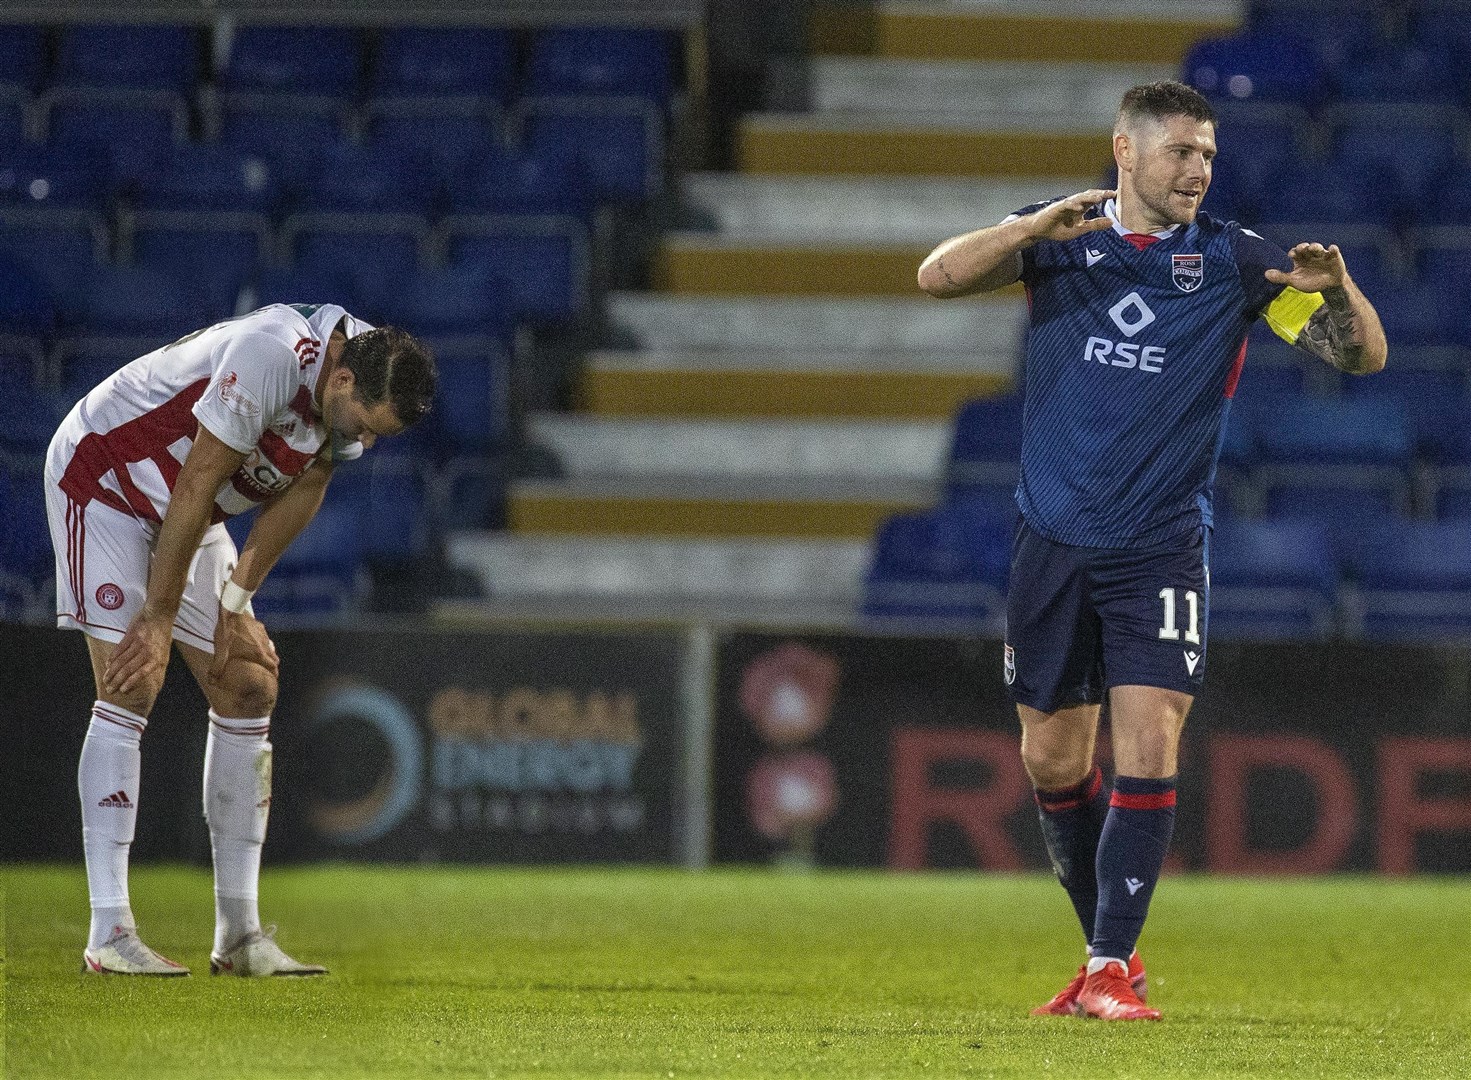 Picture - Ken Macpherson, Inverness. Ross County(2) v Hamilton(1). 12.05.21. Ross County's Iain Vigurs was overjoyed at the end.